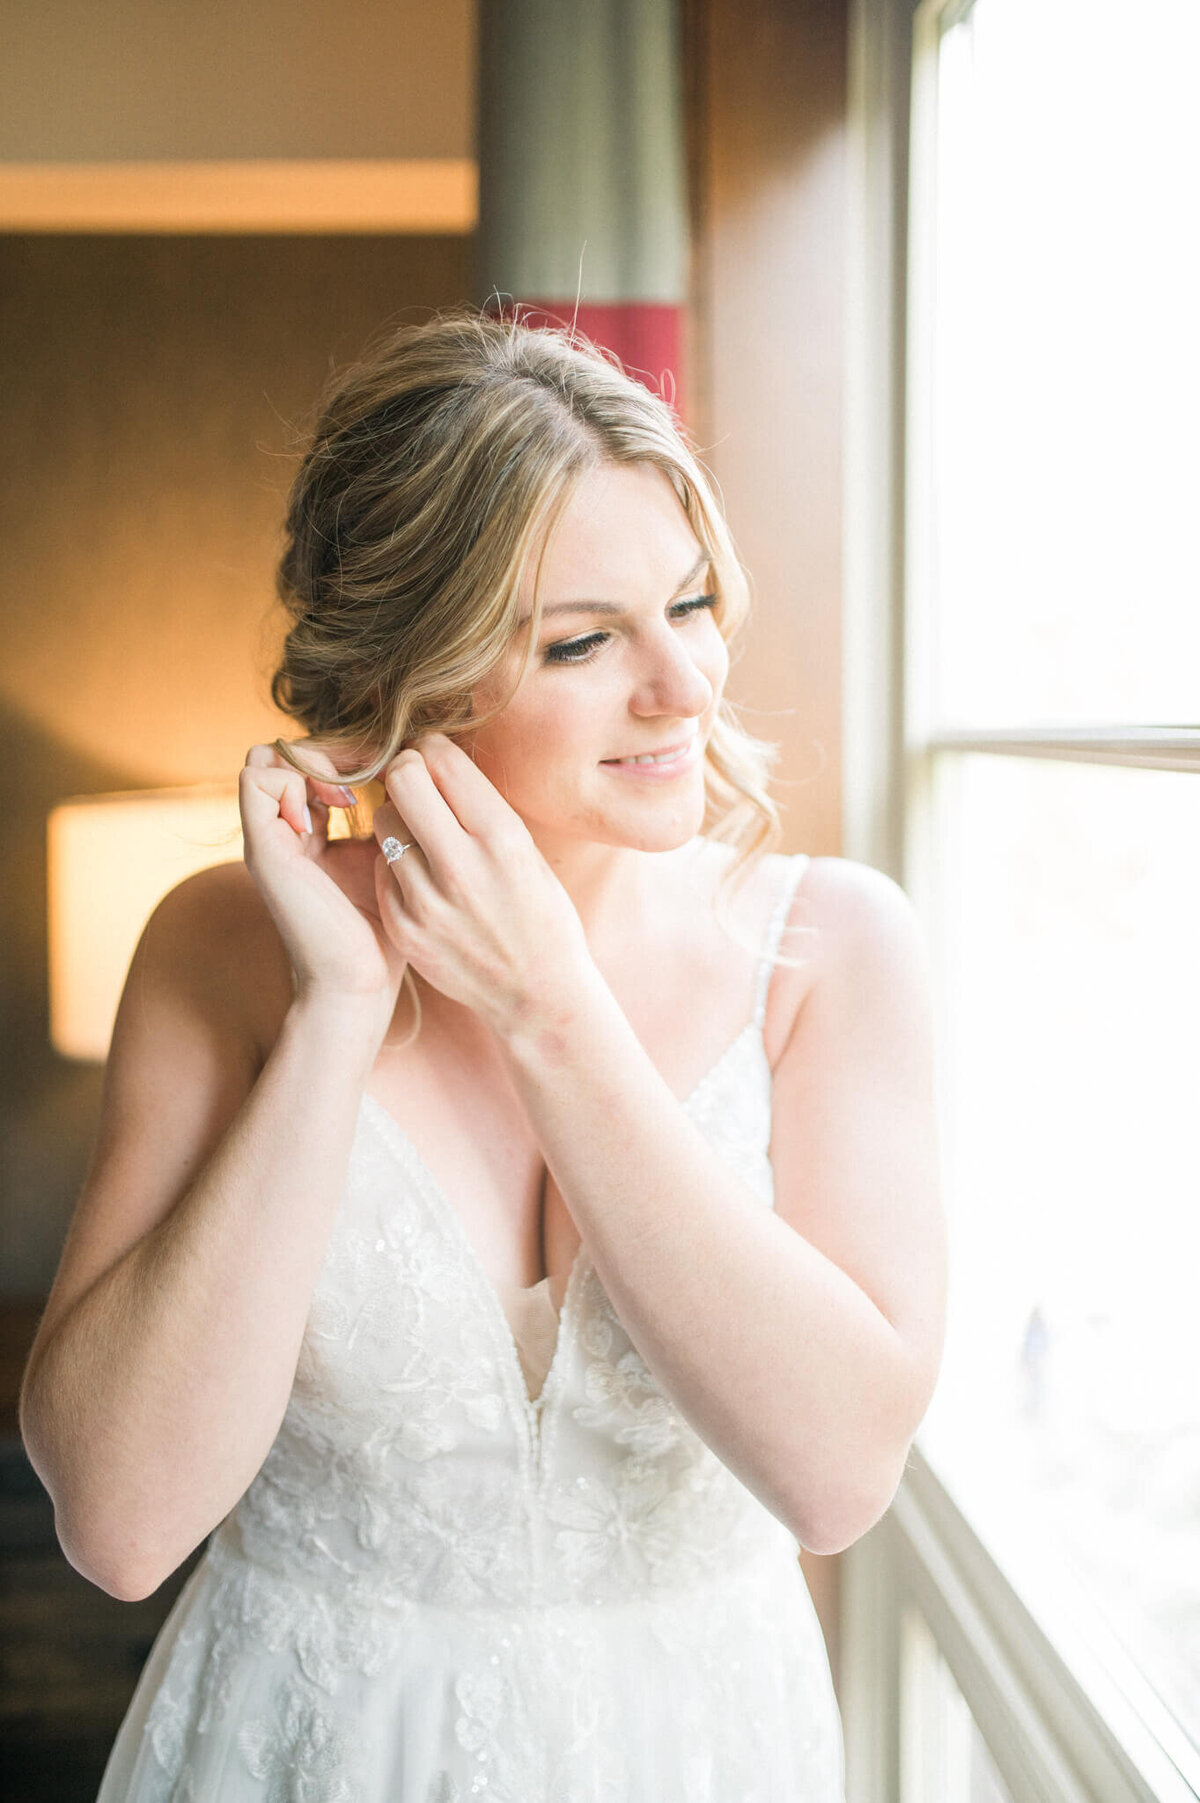 Bride putting on her earrings in front of the window